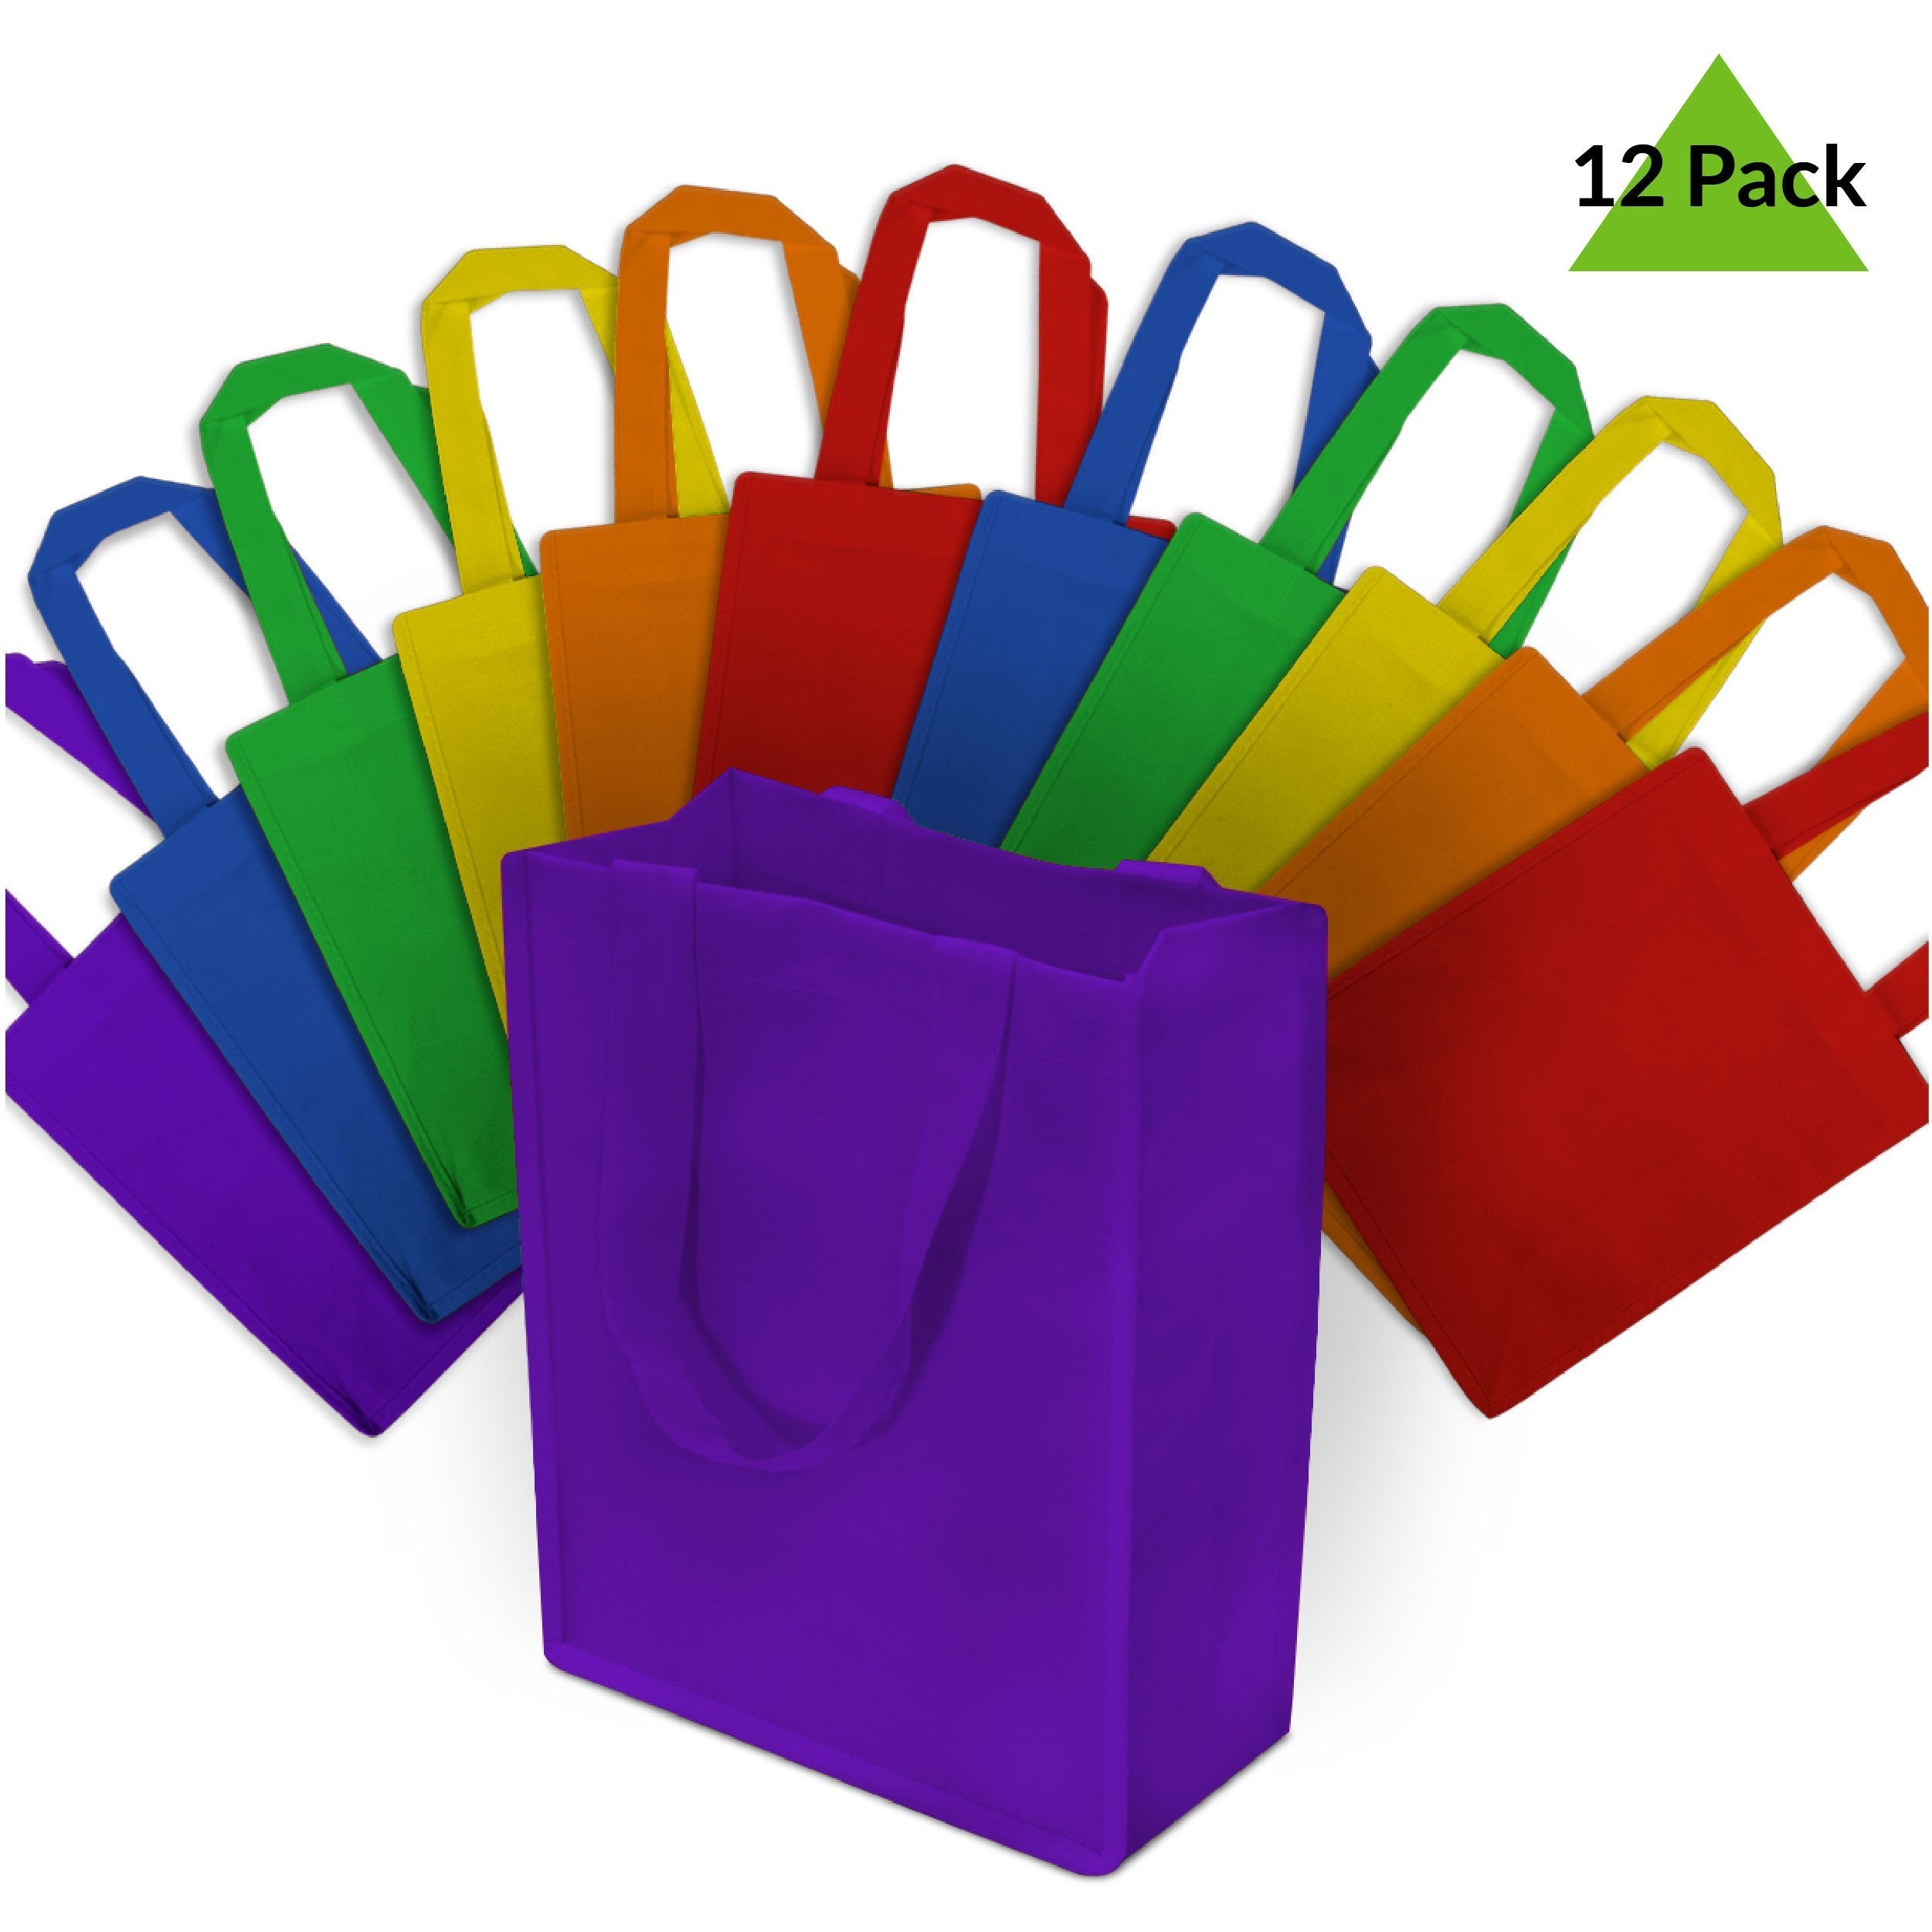 Gift Bags Bulk - 12 Pack Small Rainbow Assorted Color Fabric Gift Bags with Handles, Solid Color Mini Reusable Tote Bags for Kids Birthday Party, Goodie & Favor Bags, Crafting, Christmas Wrap - 8x4x10